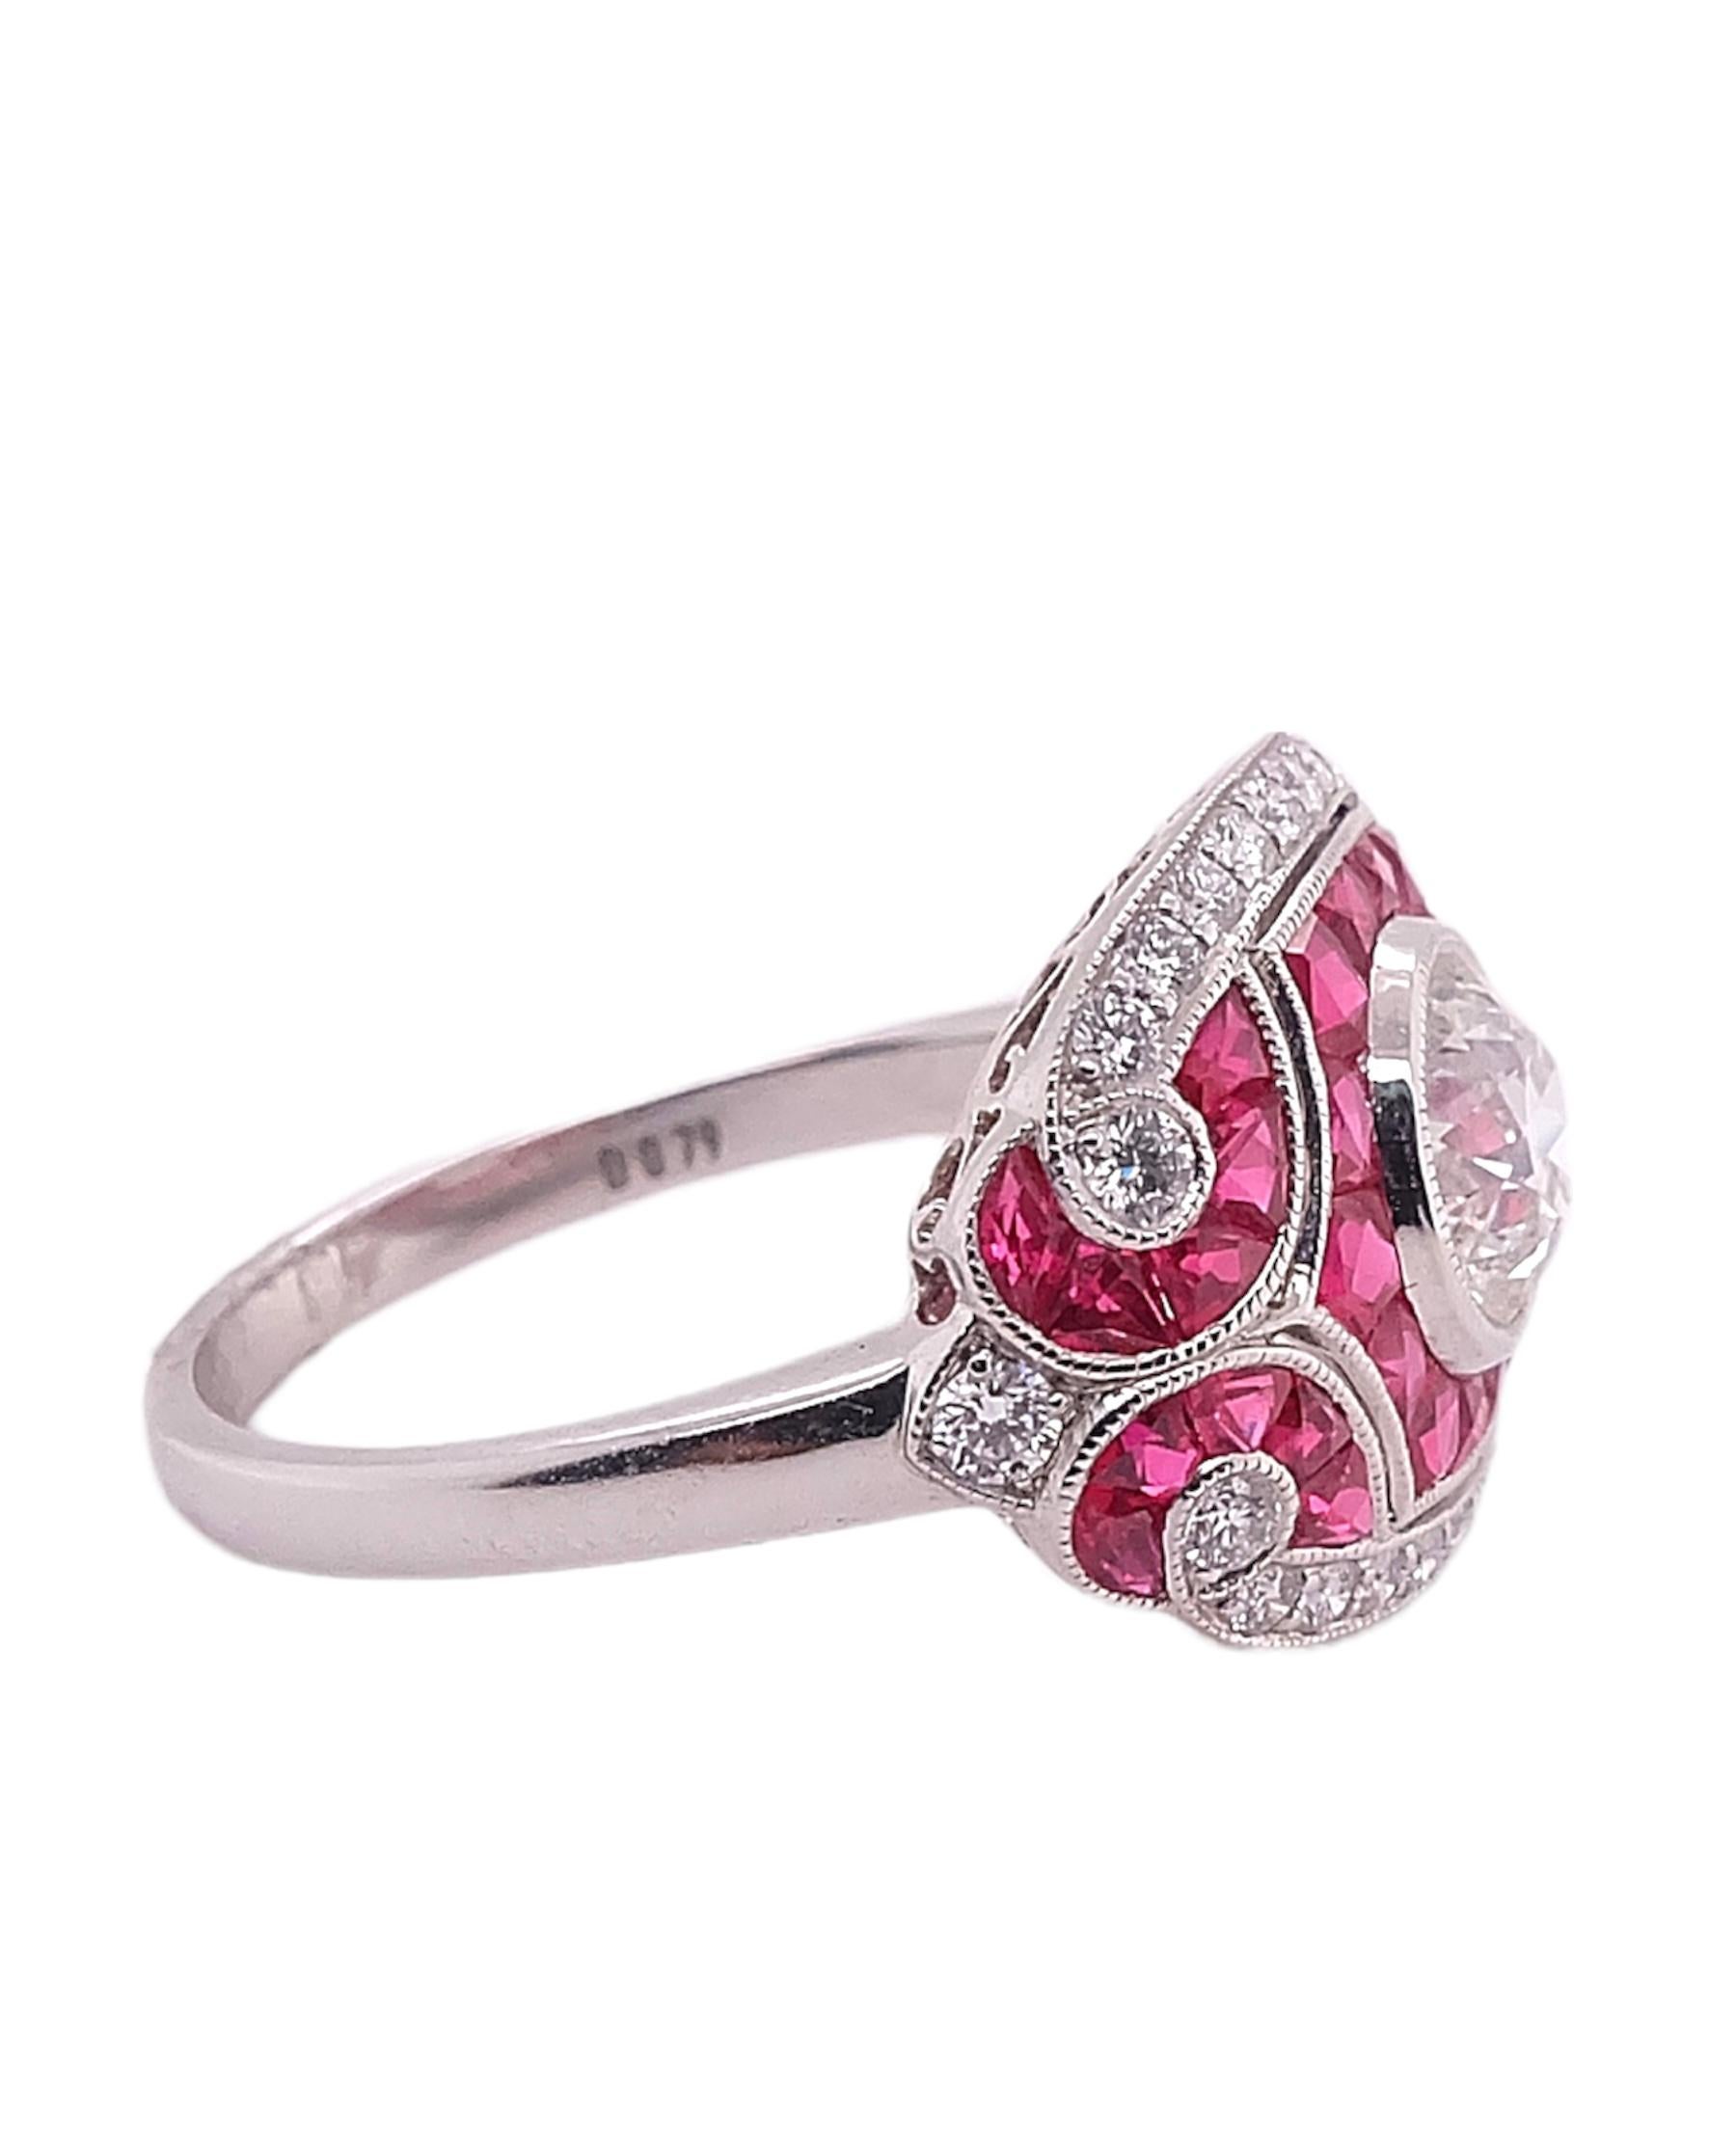 This finely detailed Art Deco style platinum ring features a 0.79 carat round diamond accentuated with 1.10 carat of rubies and 0.27 carat small diamonds. Available for resizing.

Sophia D by Joseph Dardashti LTD has been known worldwide for 35